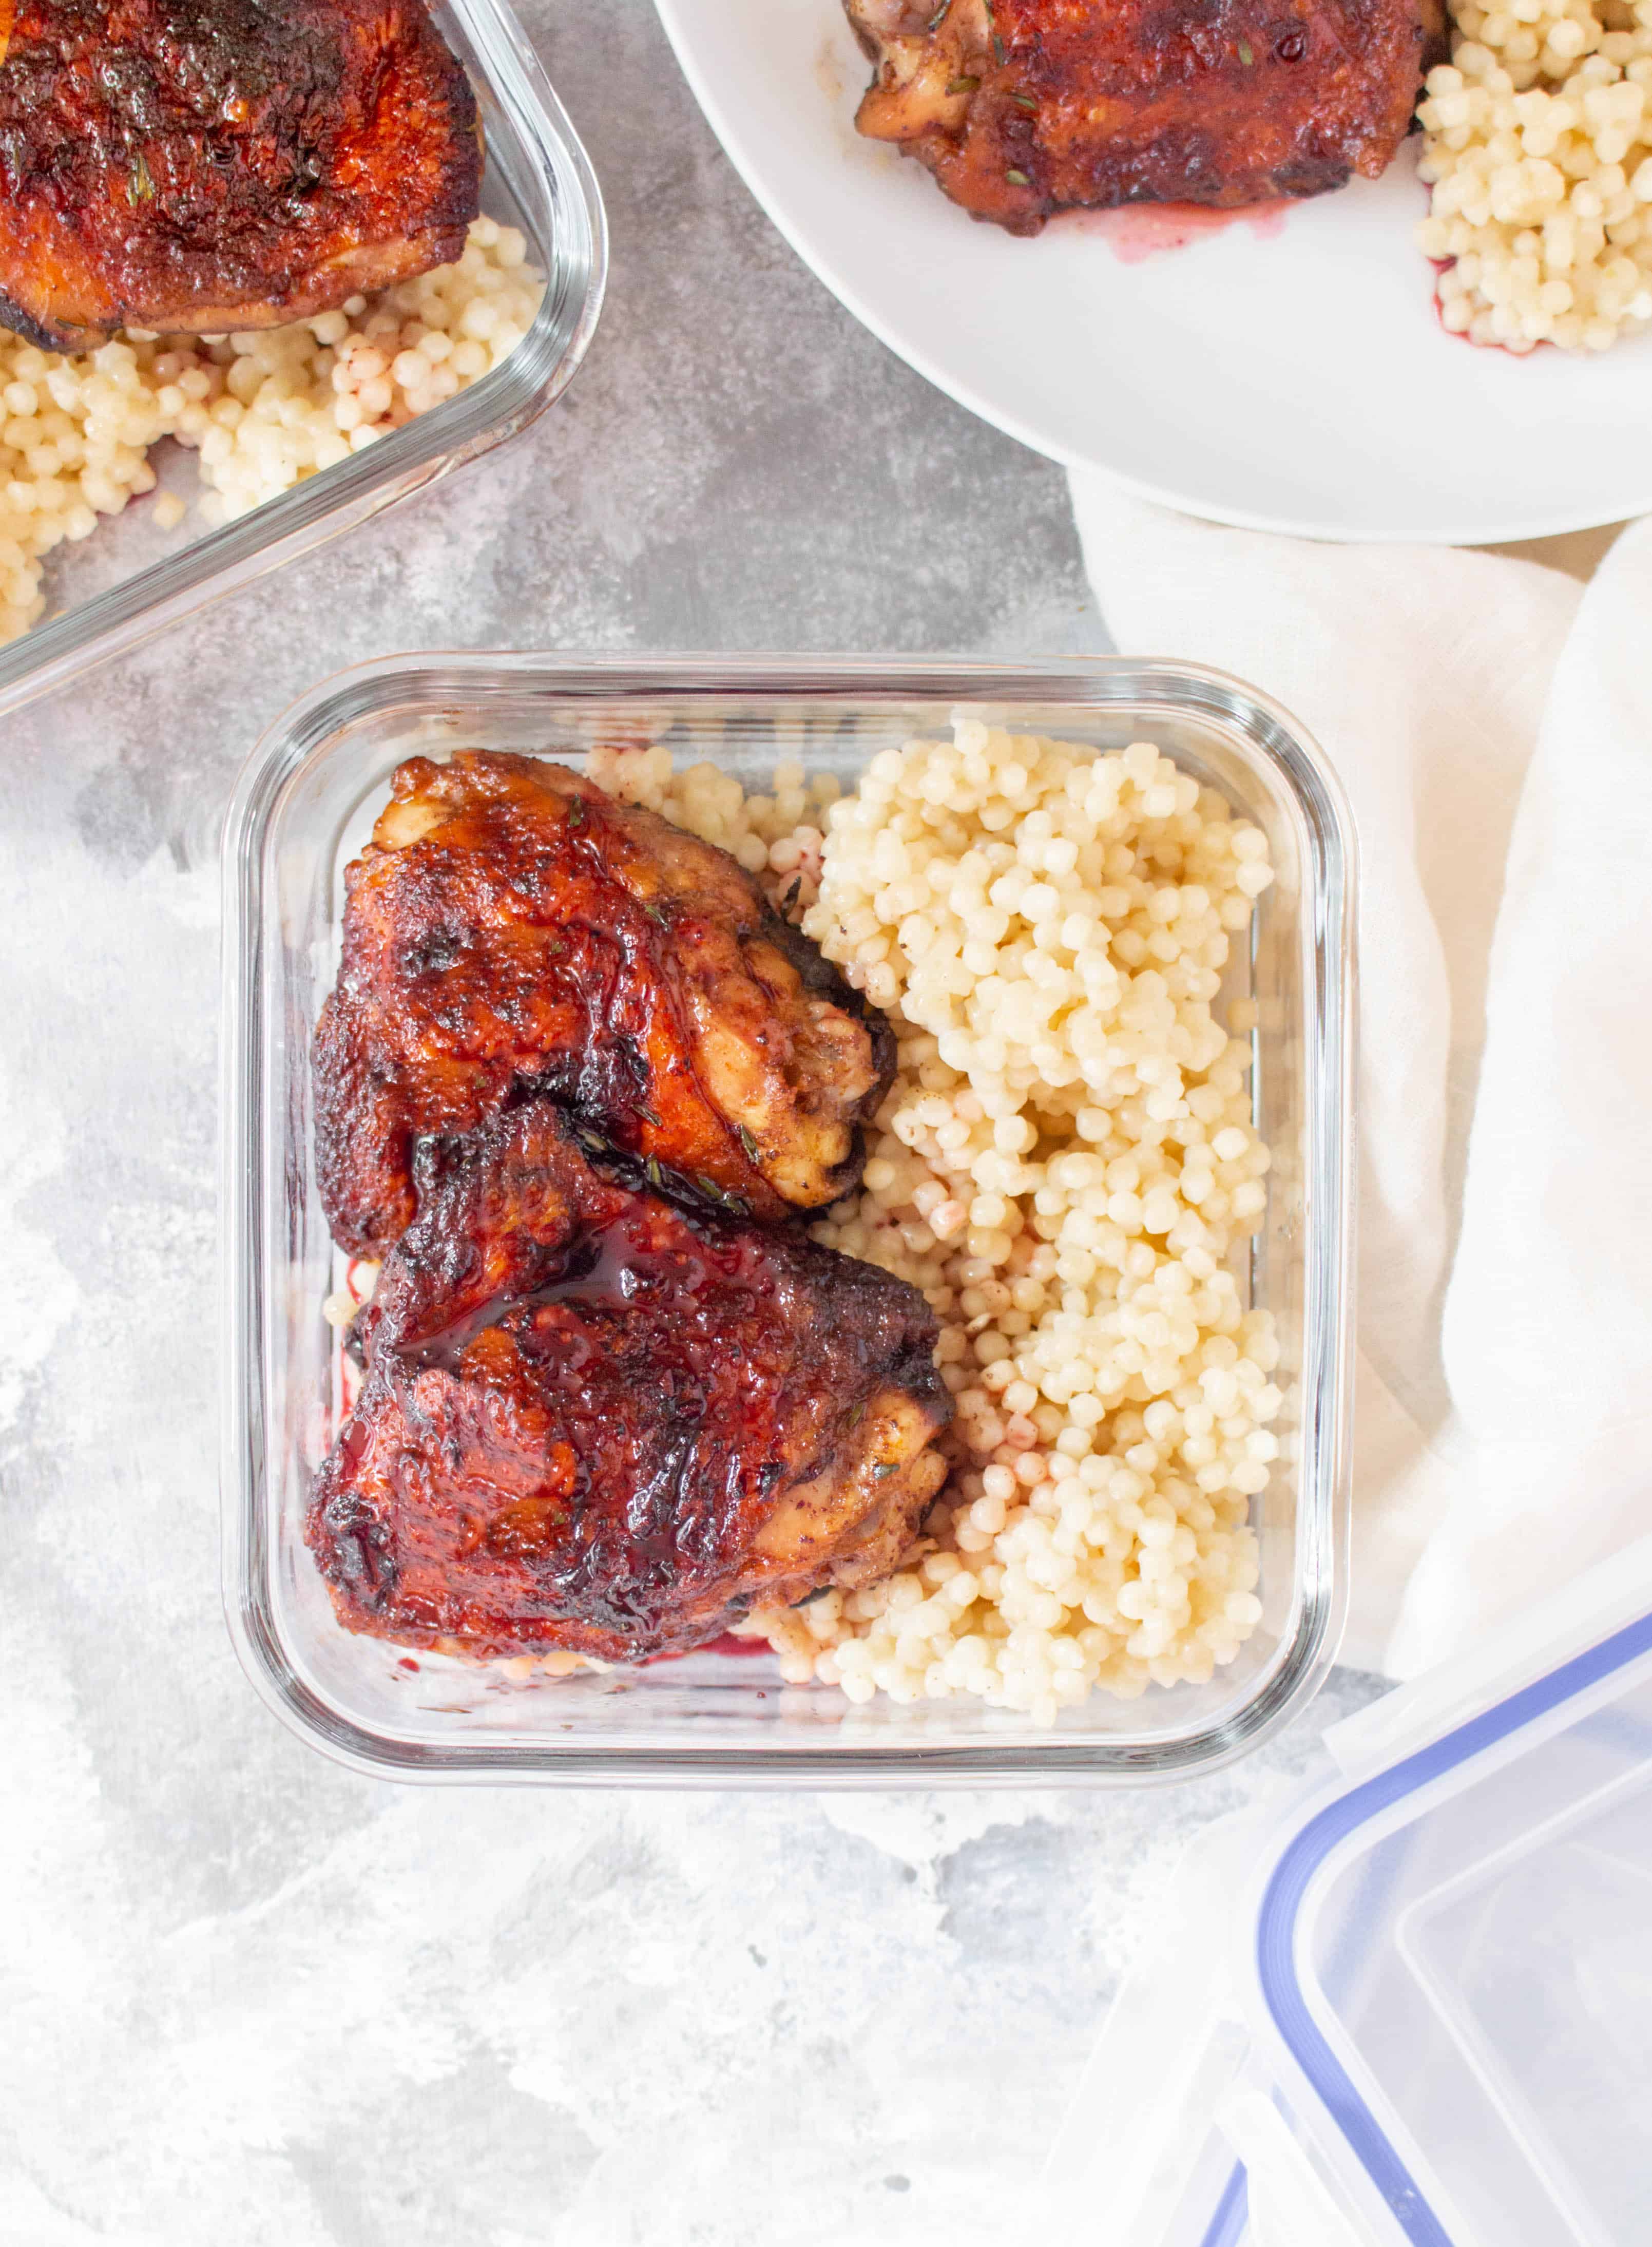 Juicy, sweet, and bursting with flavour, this Pomegranate Glazed Chicken Thighs makes for a perfect dinner or as a meal prep.